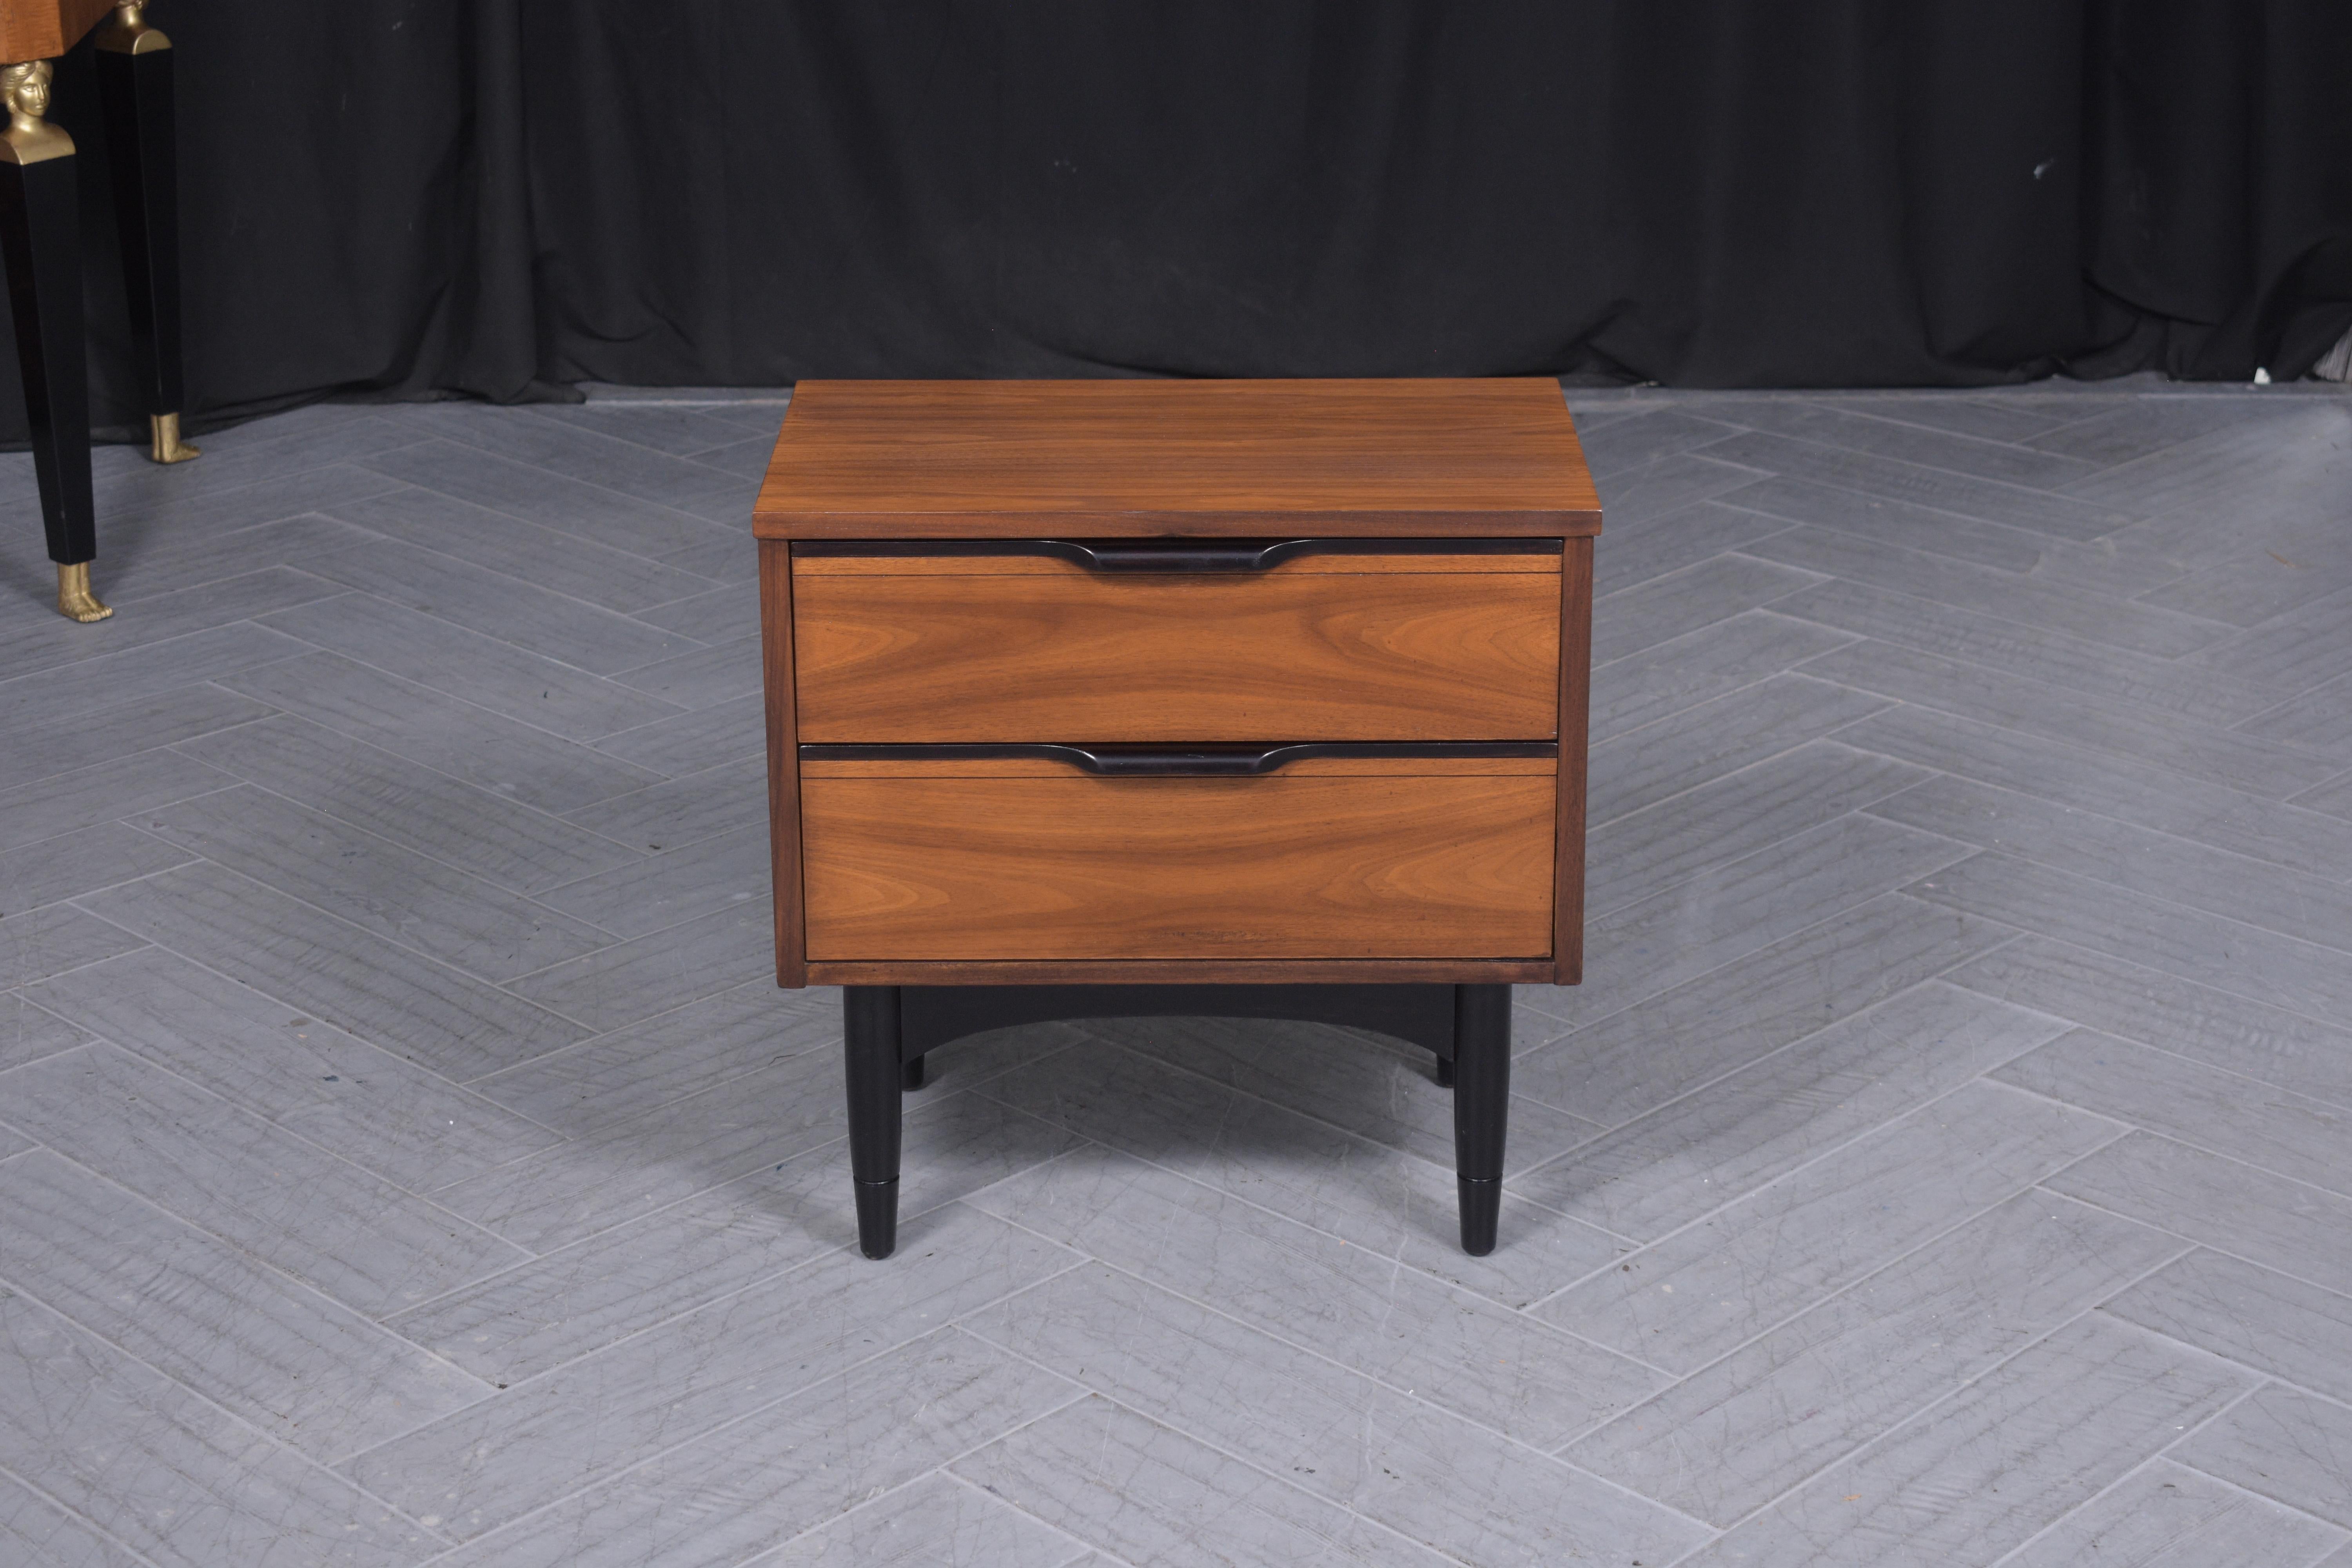 Dive into the classic 1960s with our meticulously restored mid-century modern nightstand, a fine exemplar of the period's design aesthetic. Hand-crafted from rich walnut wood, this nightstand showcases the craftsmanship and attention to detail